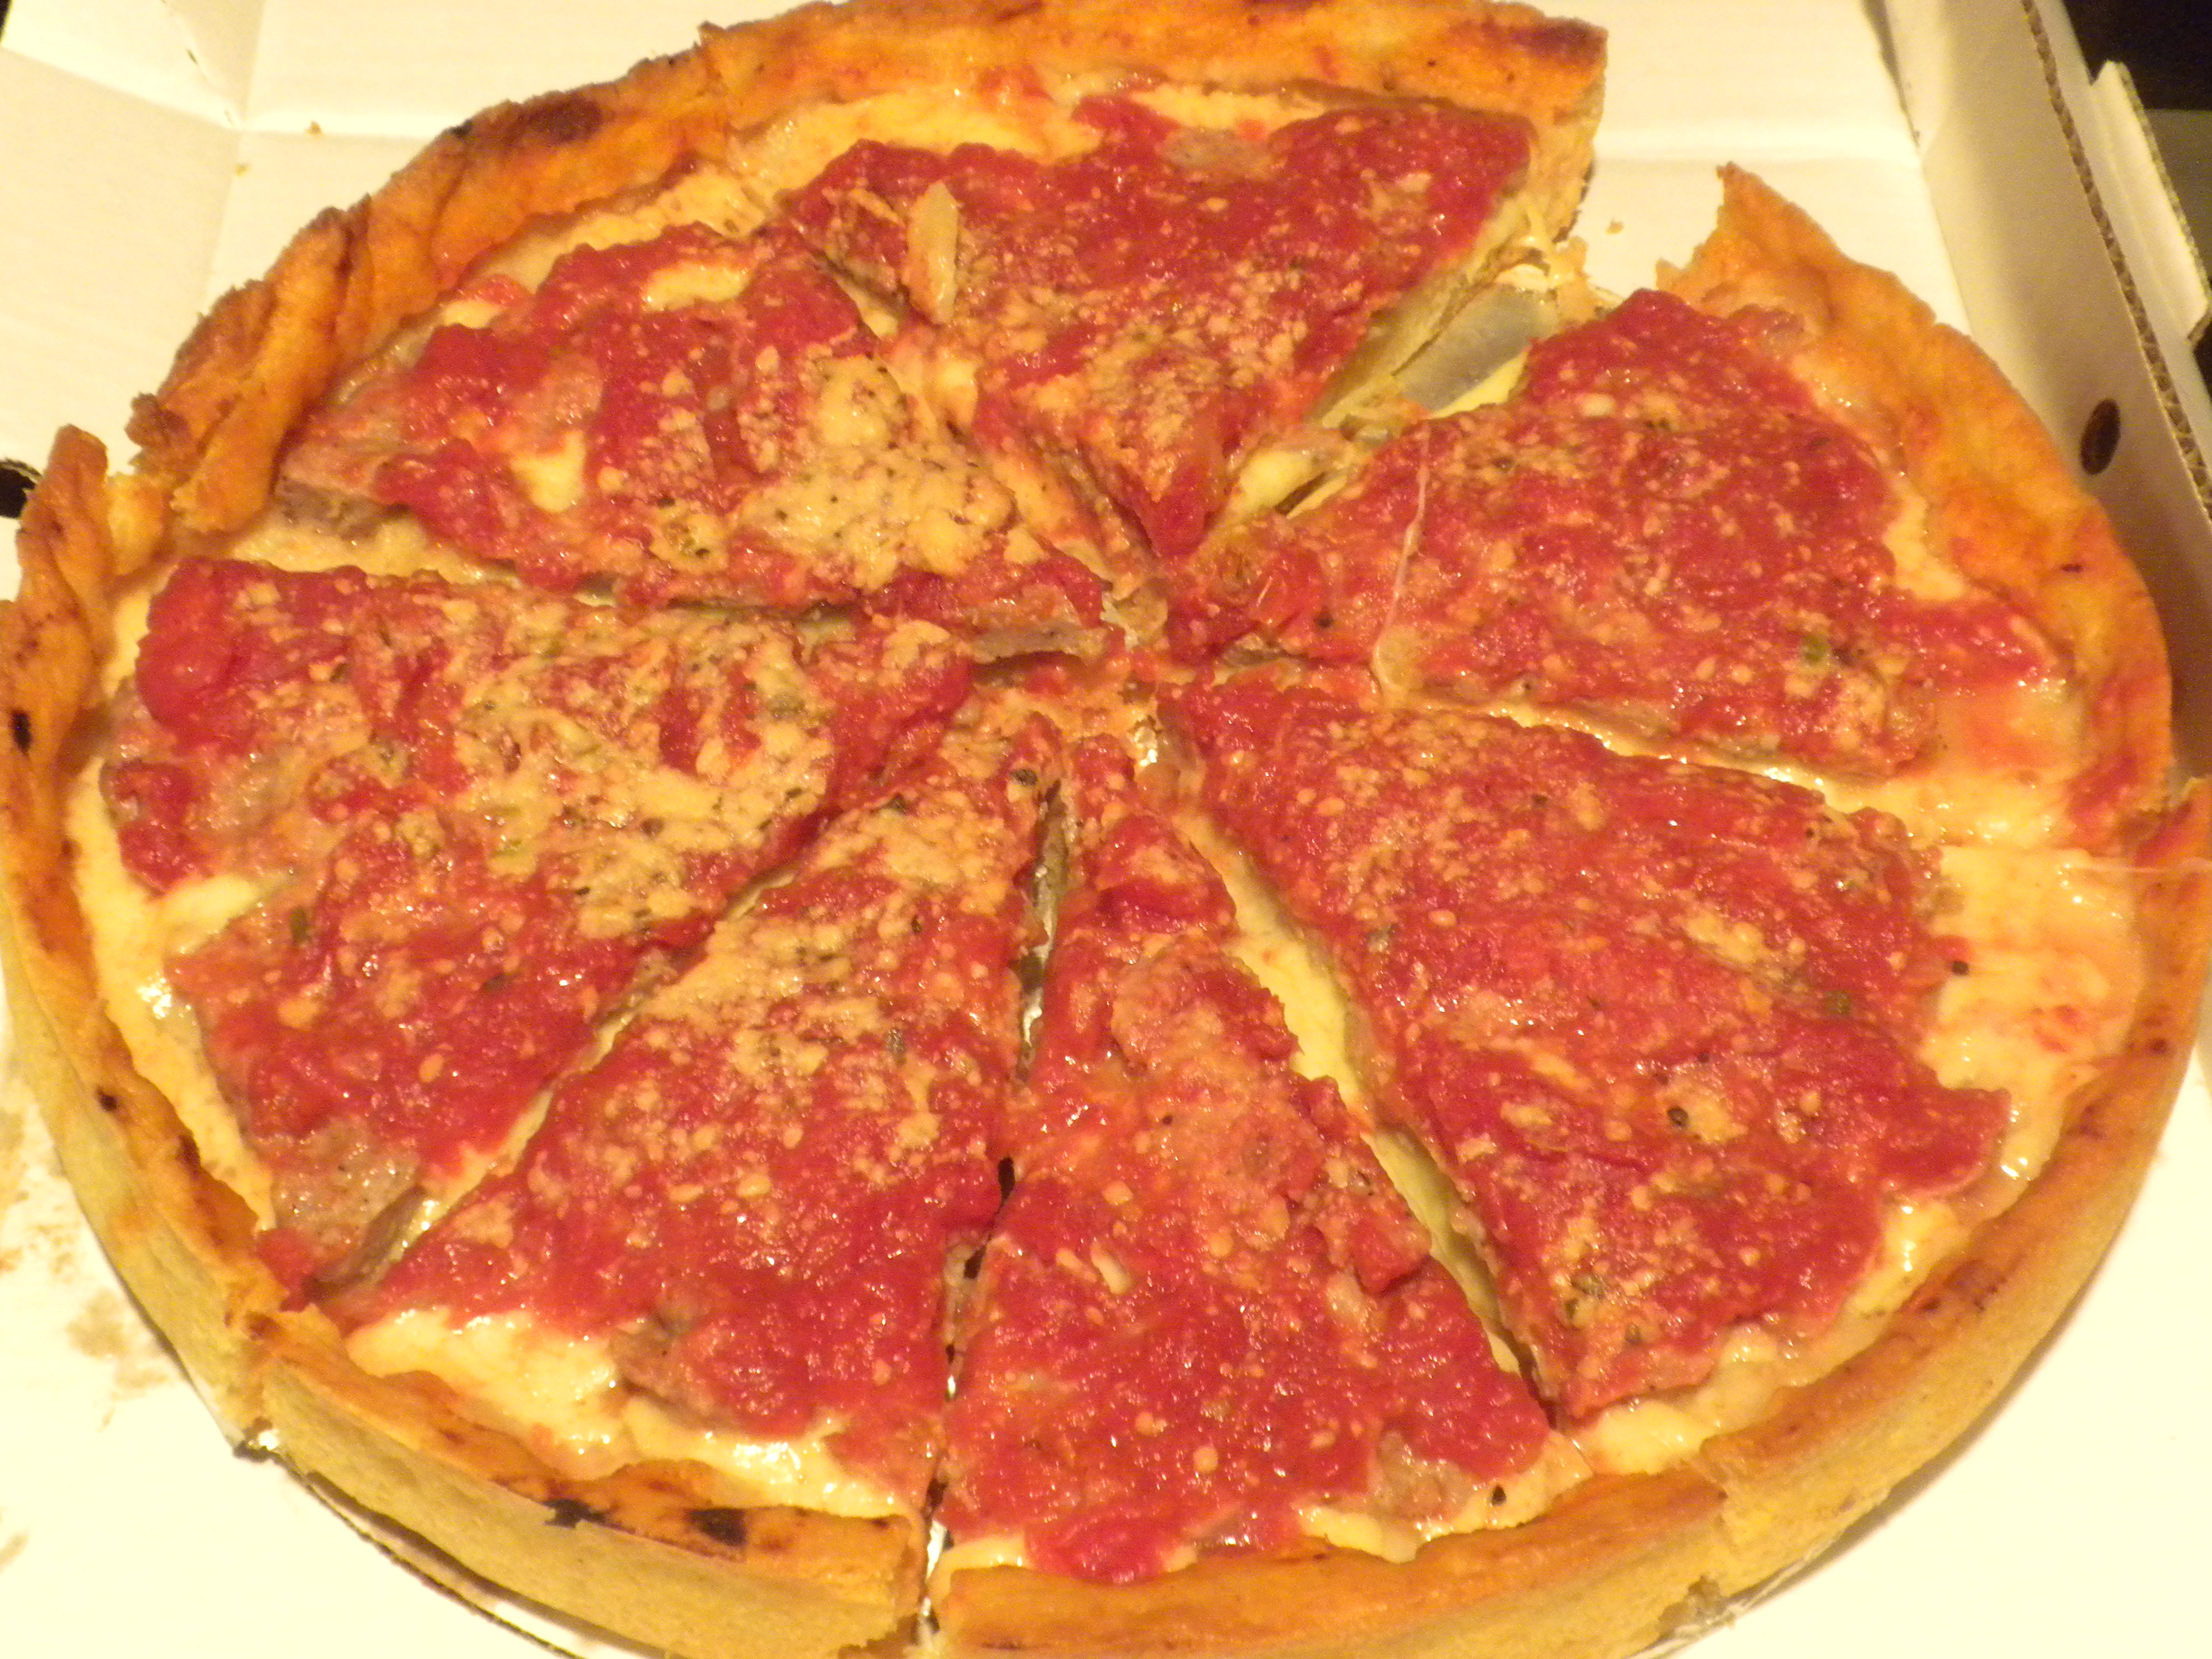 Chicago-style-pizza-03.jpg